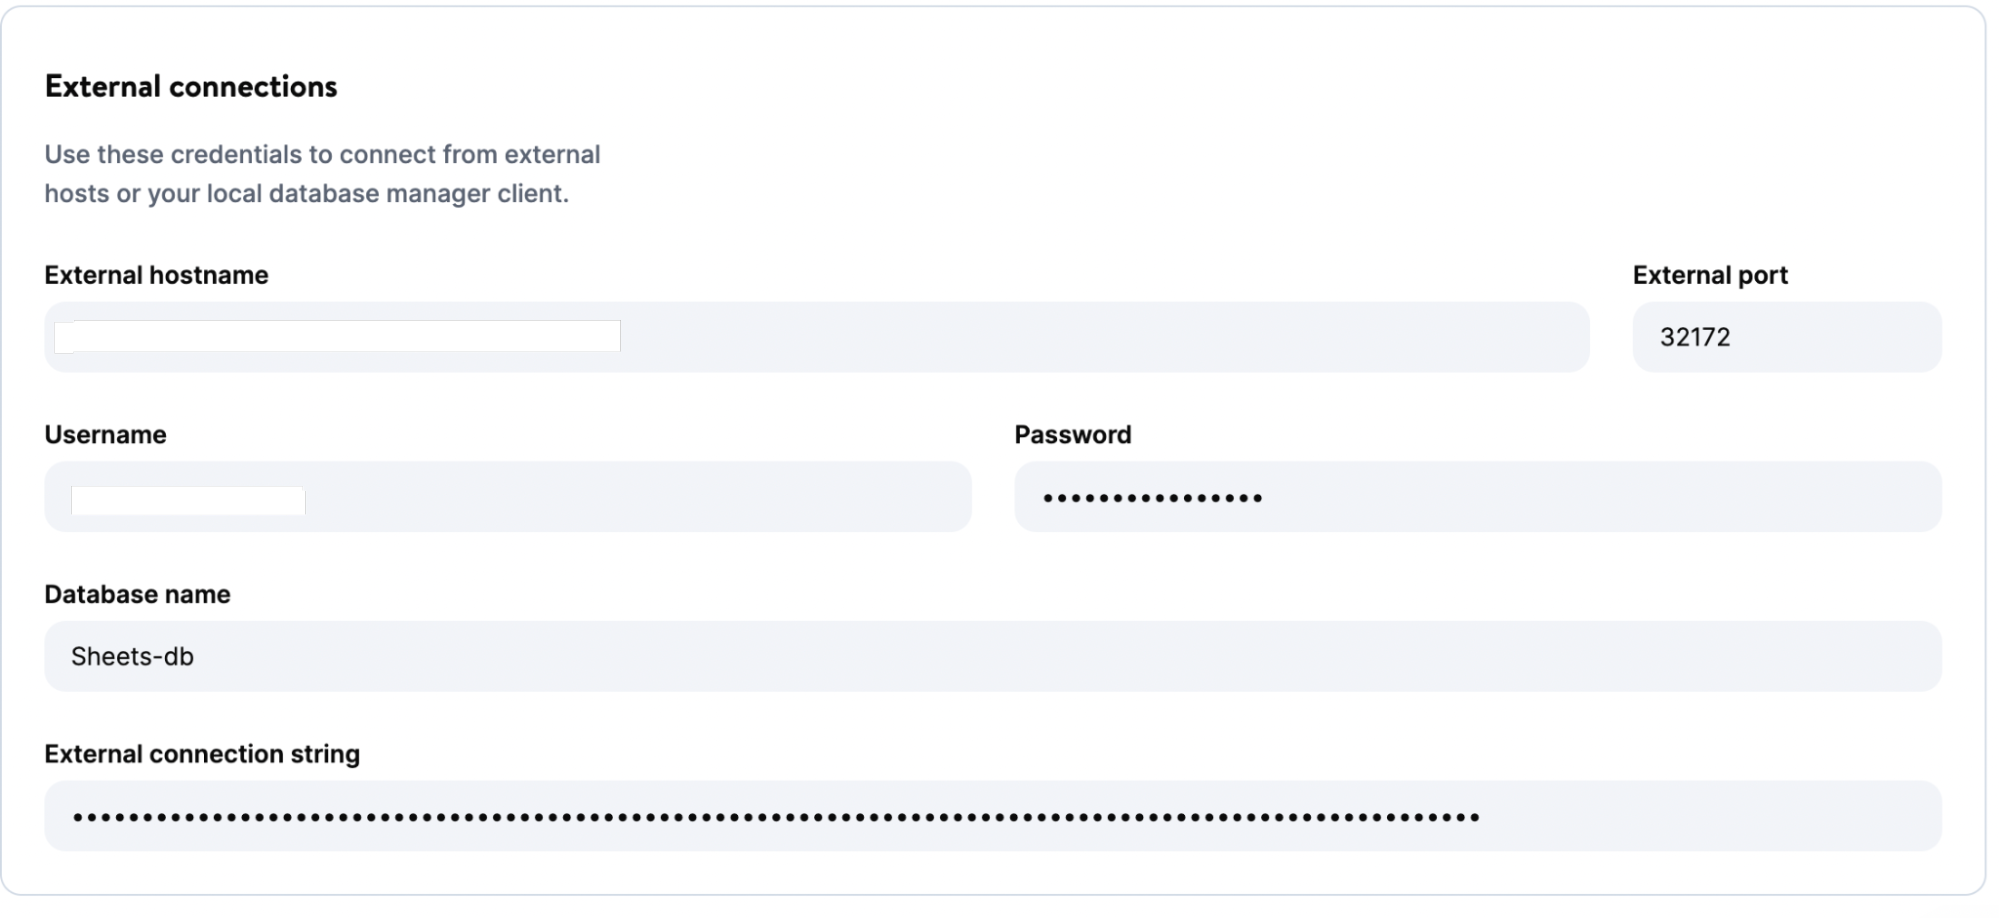 The External connections page shows the External hostname, External port, Username, Password, Database name, and External connection string fields